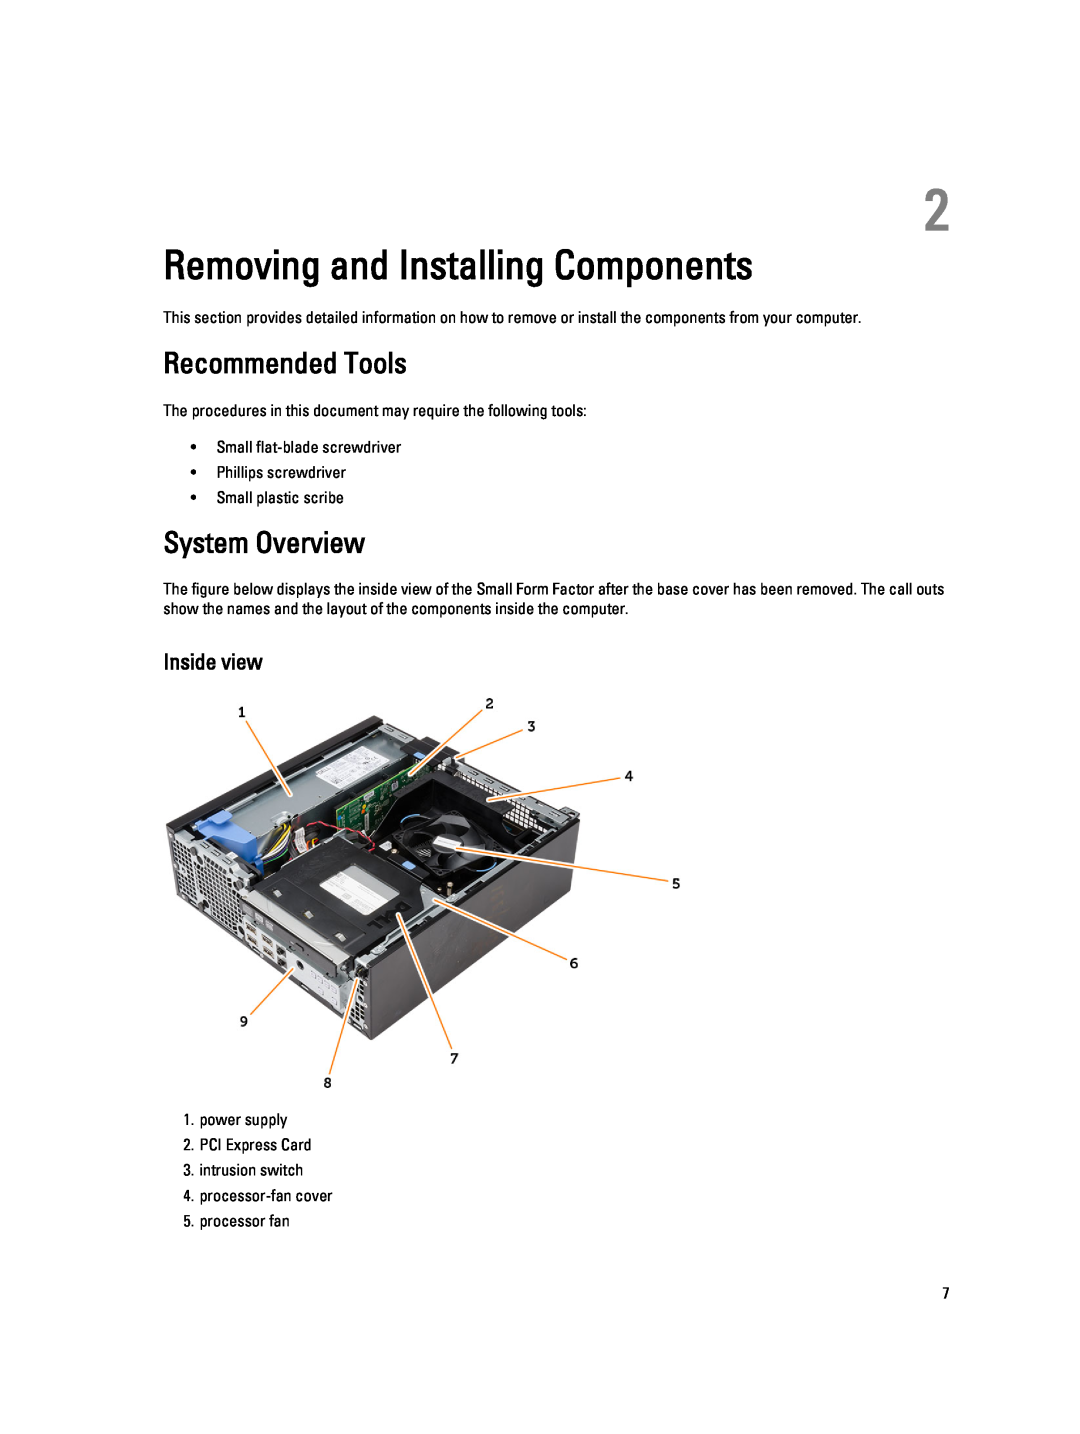 Dell T1700 owner manual Removing and Installing Components, Recommended Tools, System Overview, Inside view 